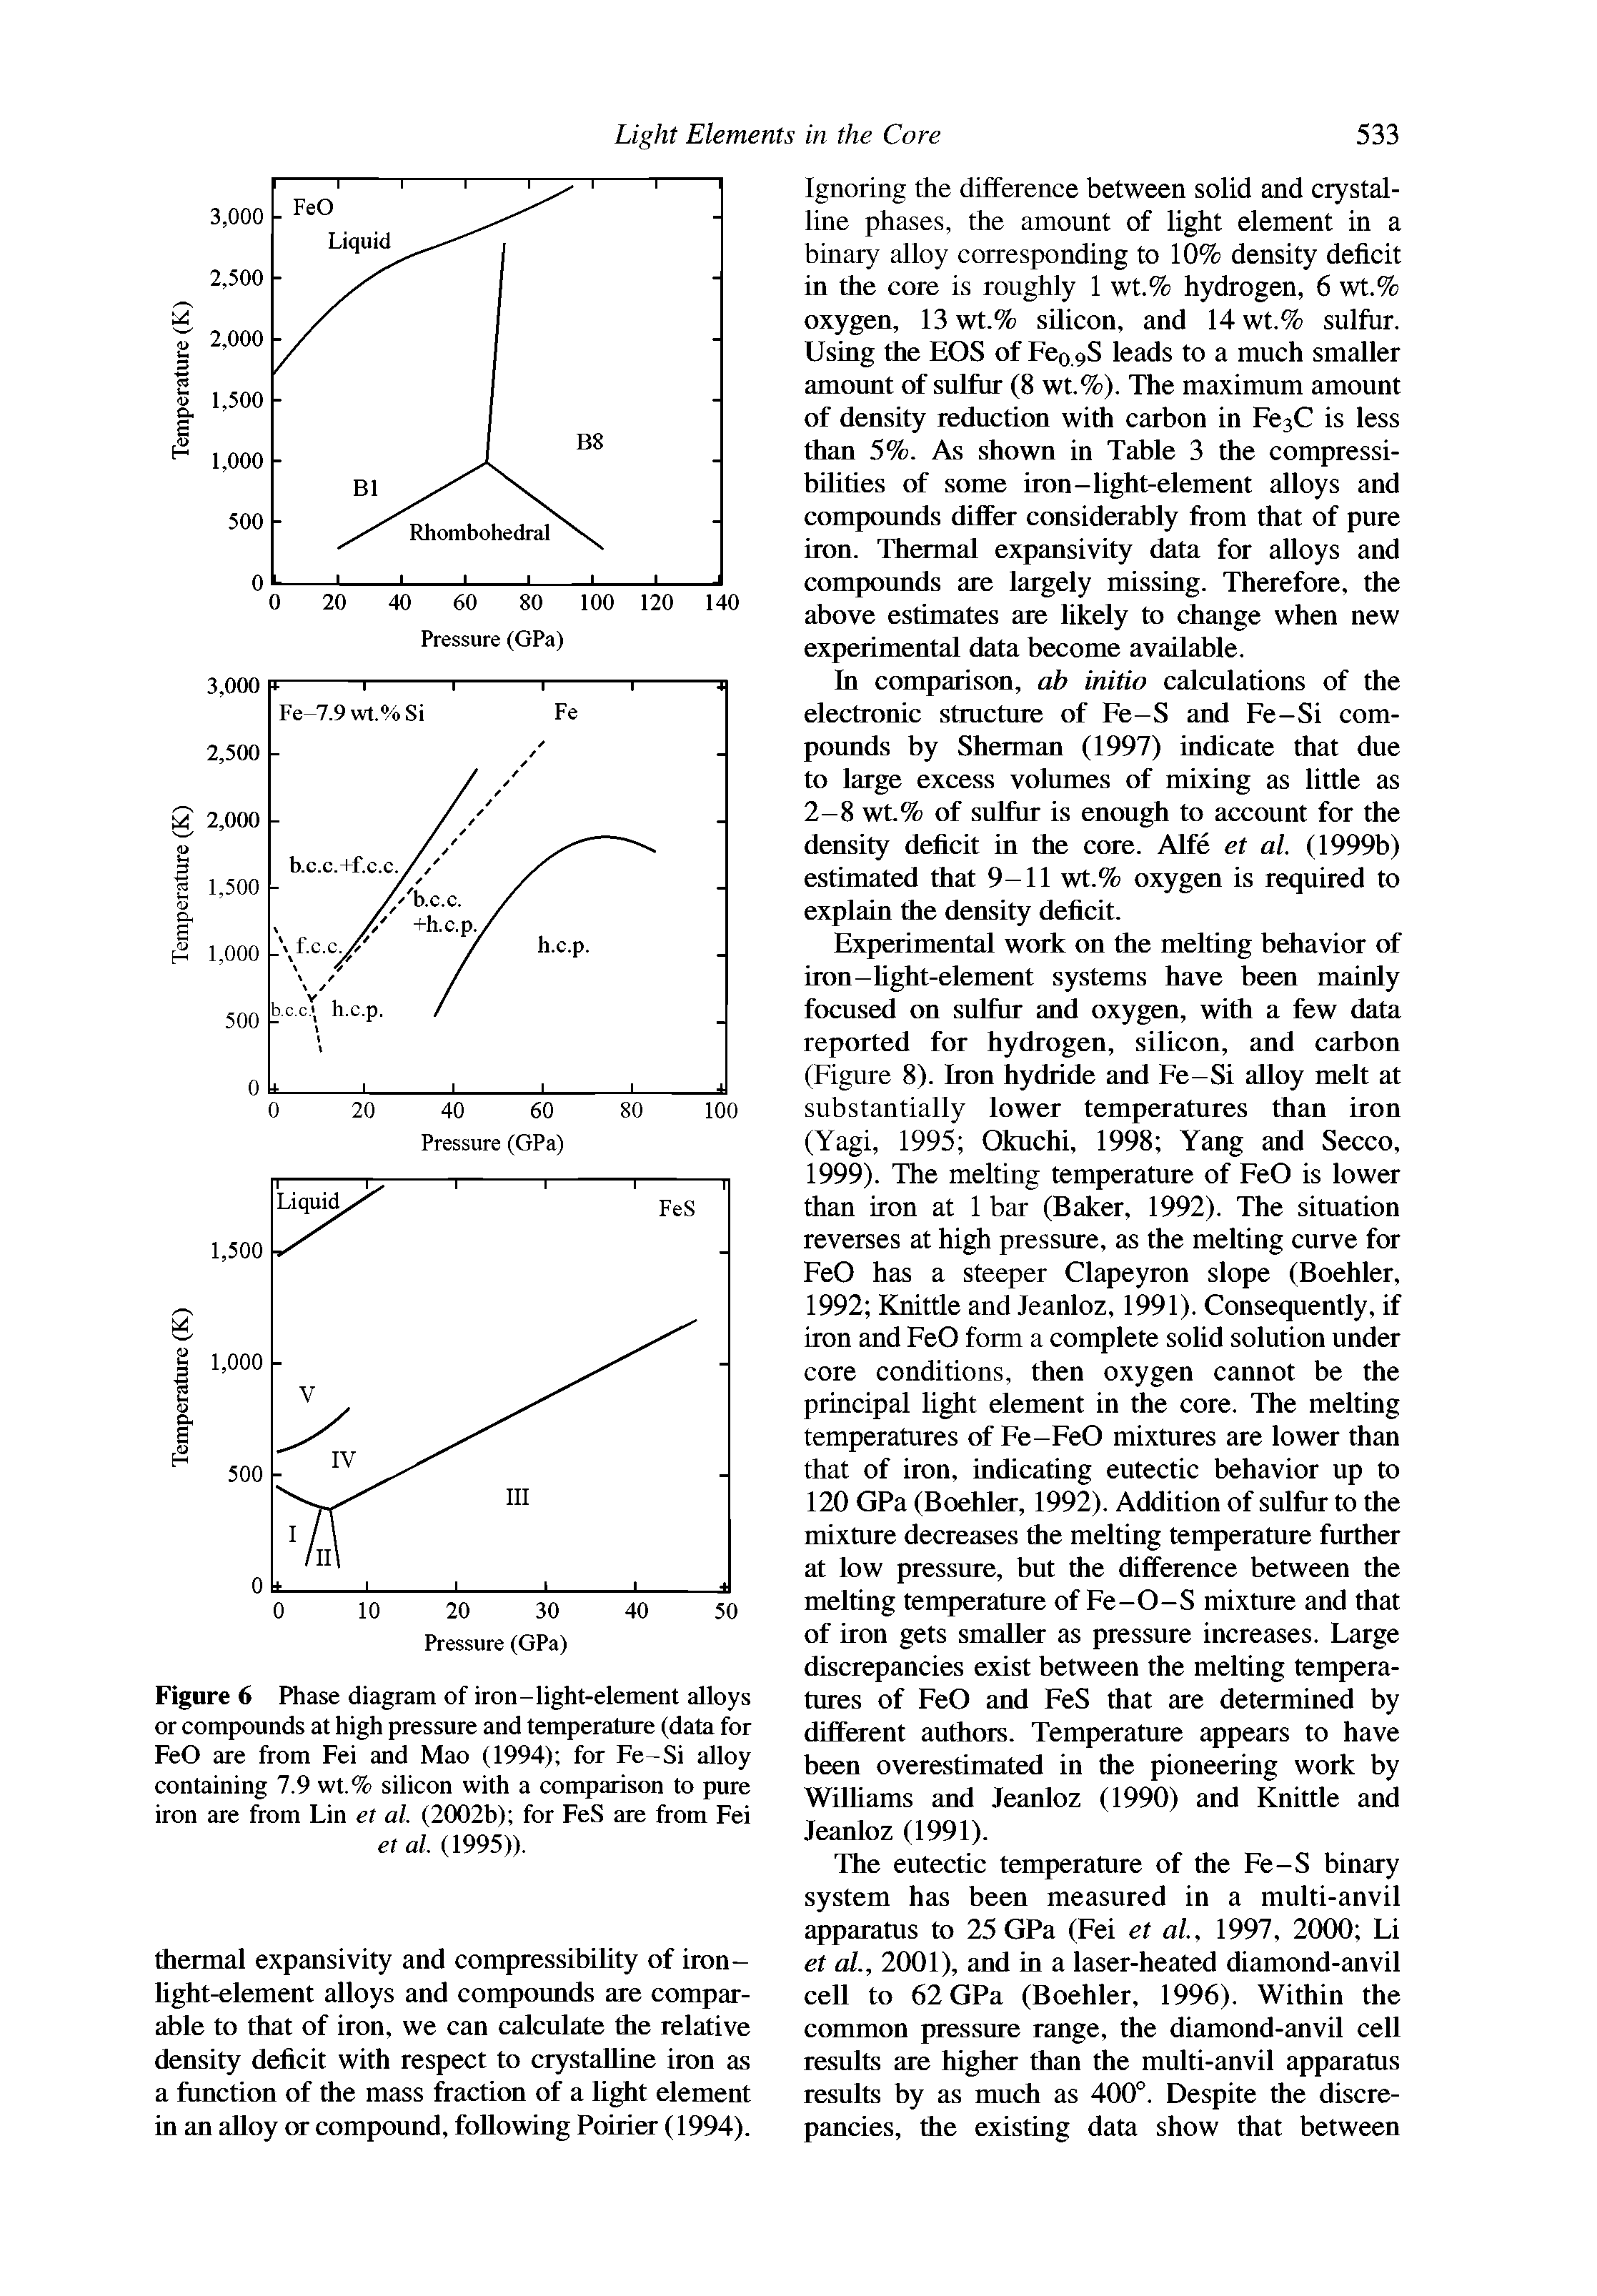 Figure 6 Phase diagram of iron-light-element alloys or compounds at high pressure and temperature (data for FeO are from Fei and Mao (1994) for Fe-Si alloy containing 7.9 wt.% silicon with a comparison to pure iron are from Lin et al. (2002b) for FeS are from Fei et al. (1995)).